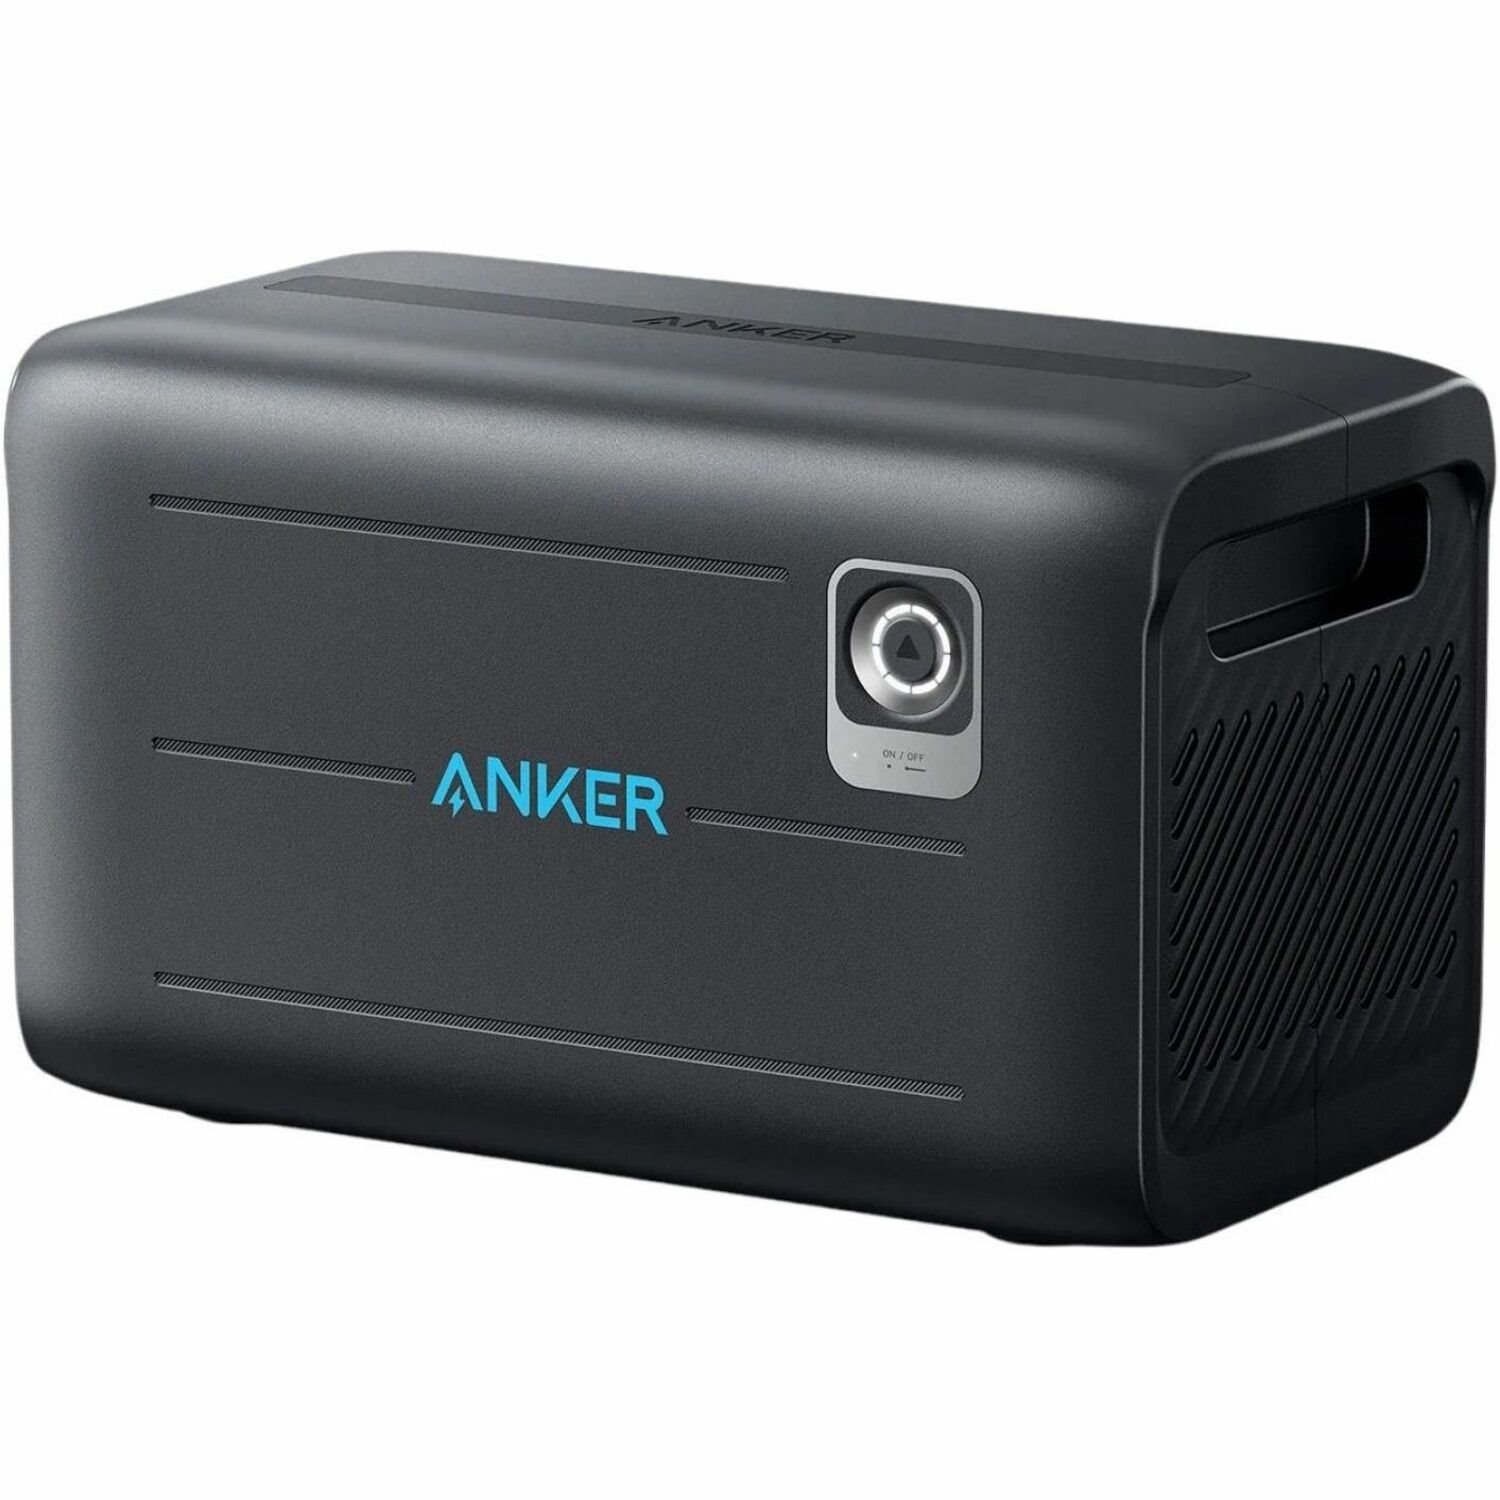 ANKER SOLIX BP2000 Battery - Lithium Iron Phosphate (LiFePO4)